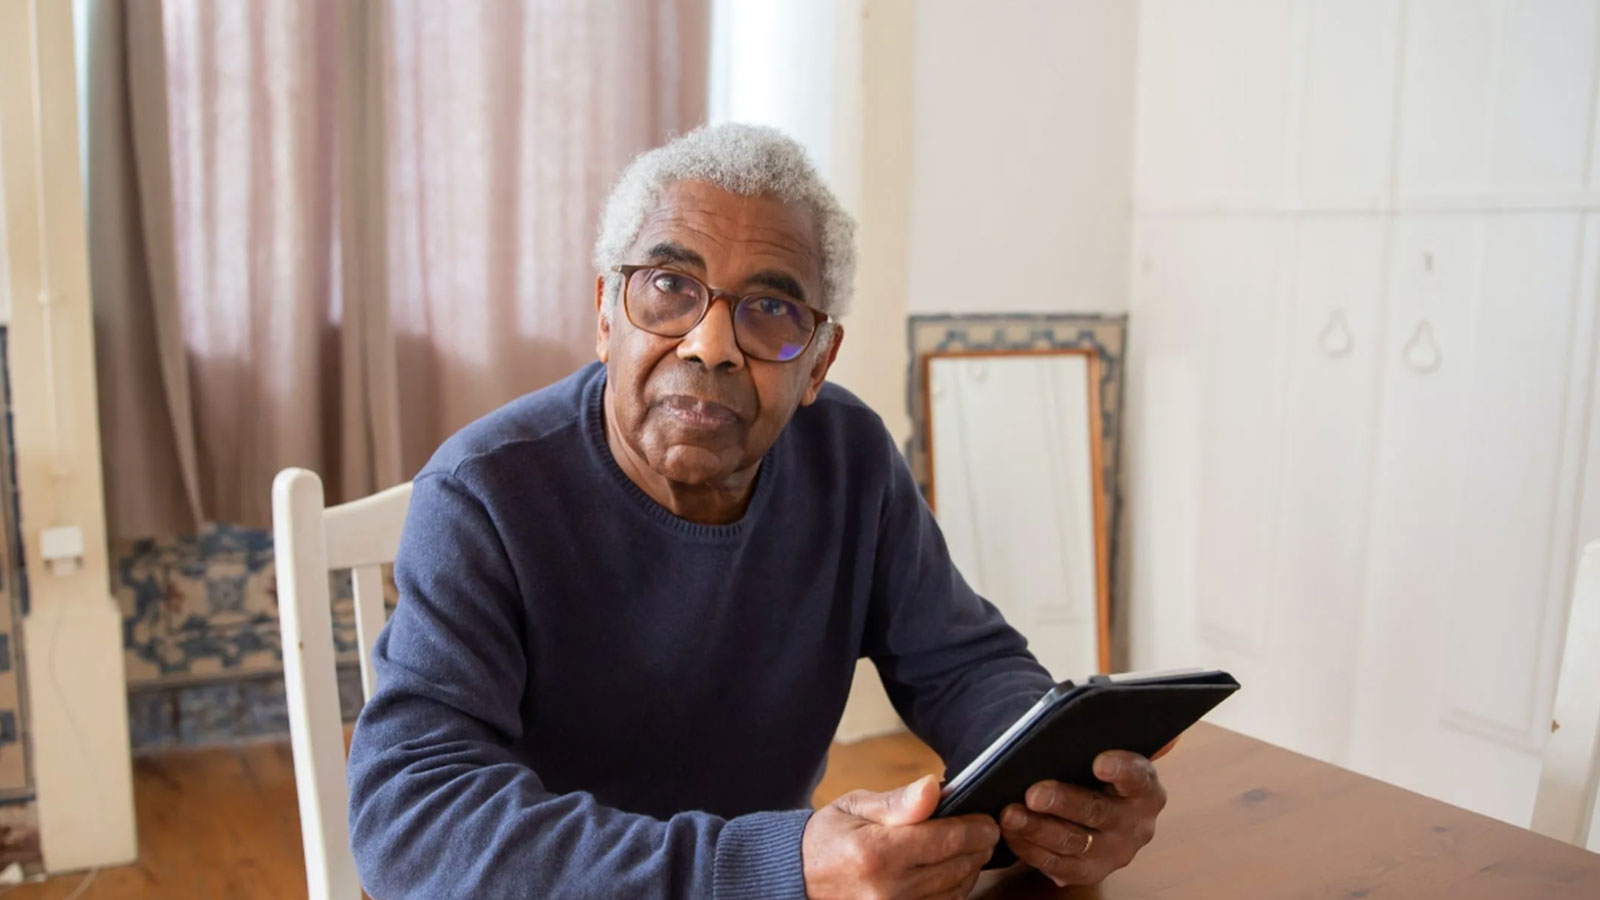 Health: Is racism causing Black folks’ brains to age faster?